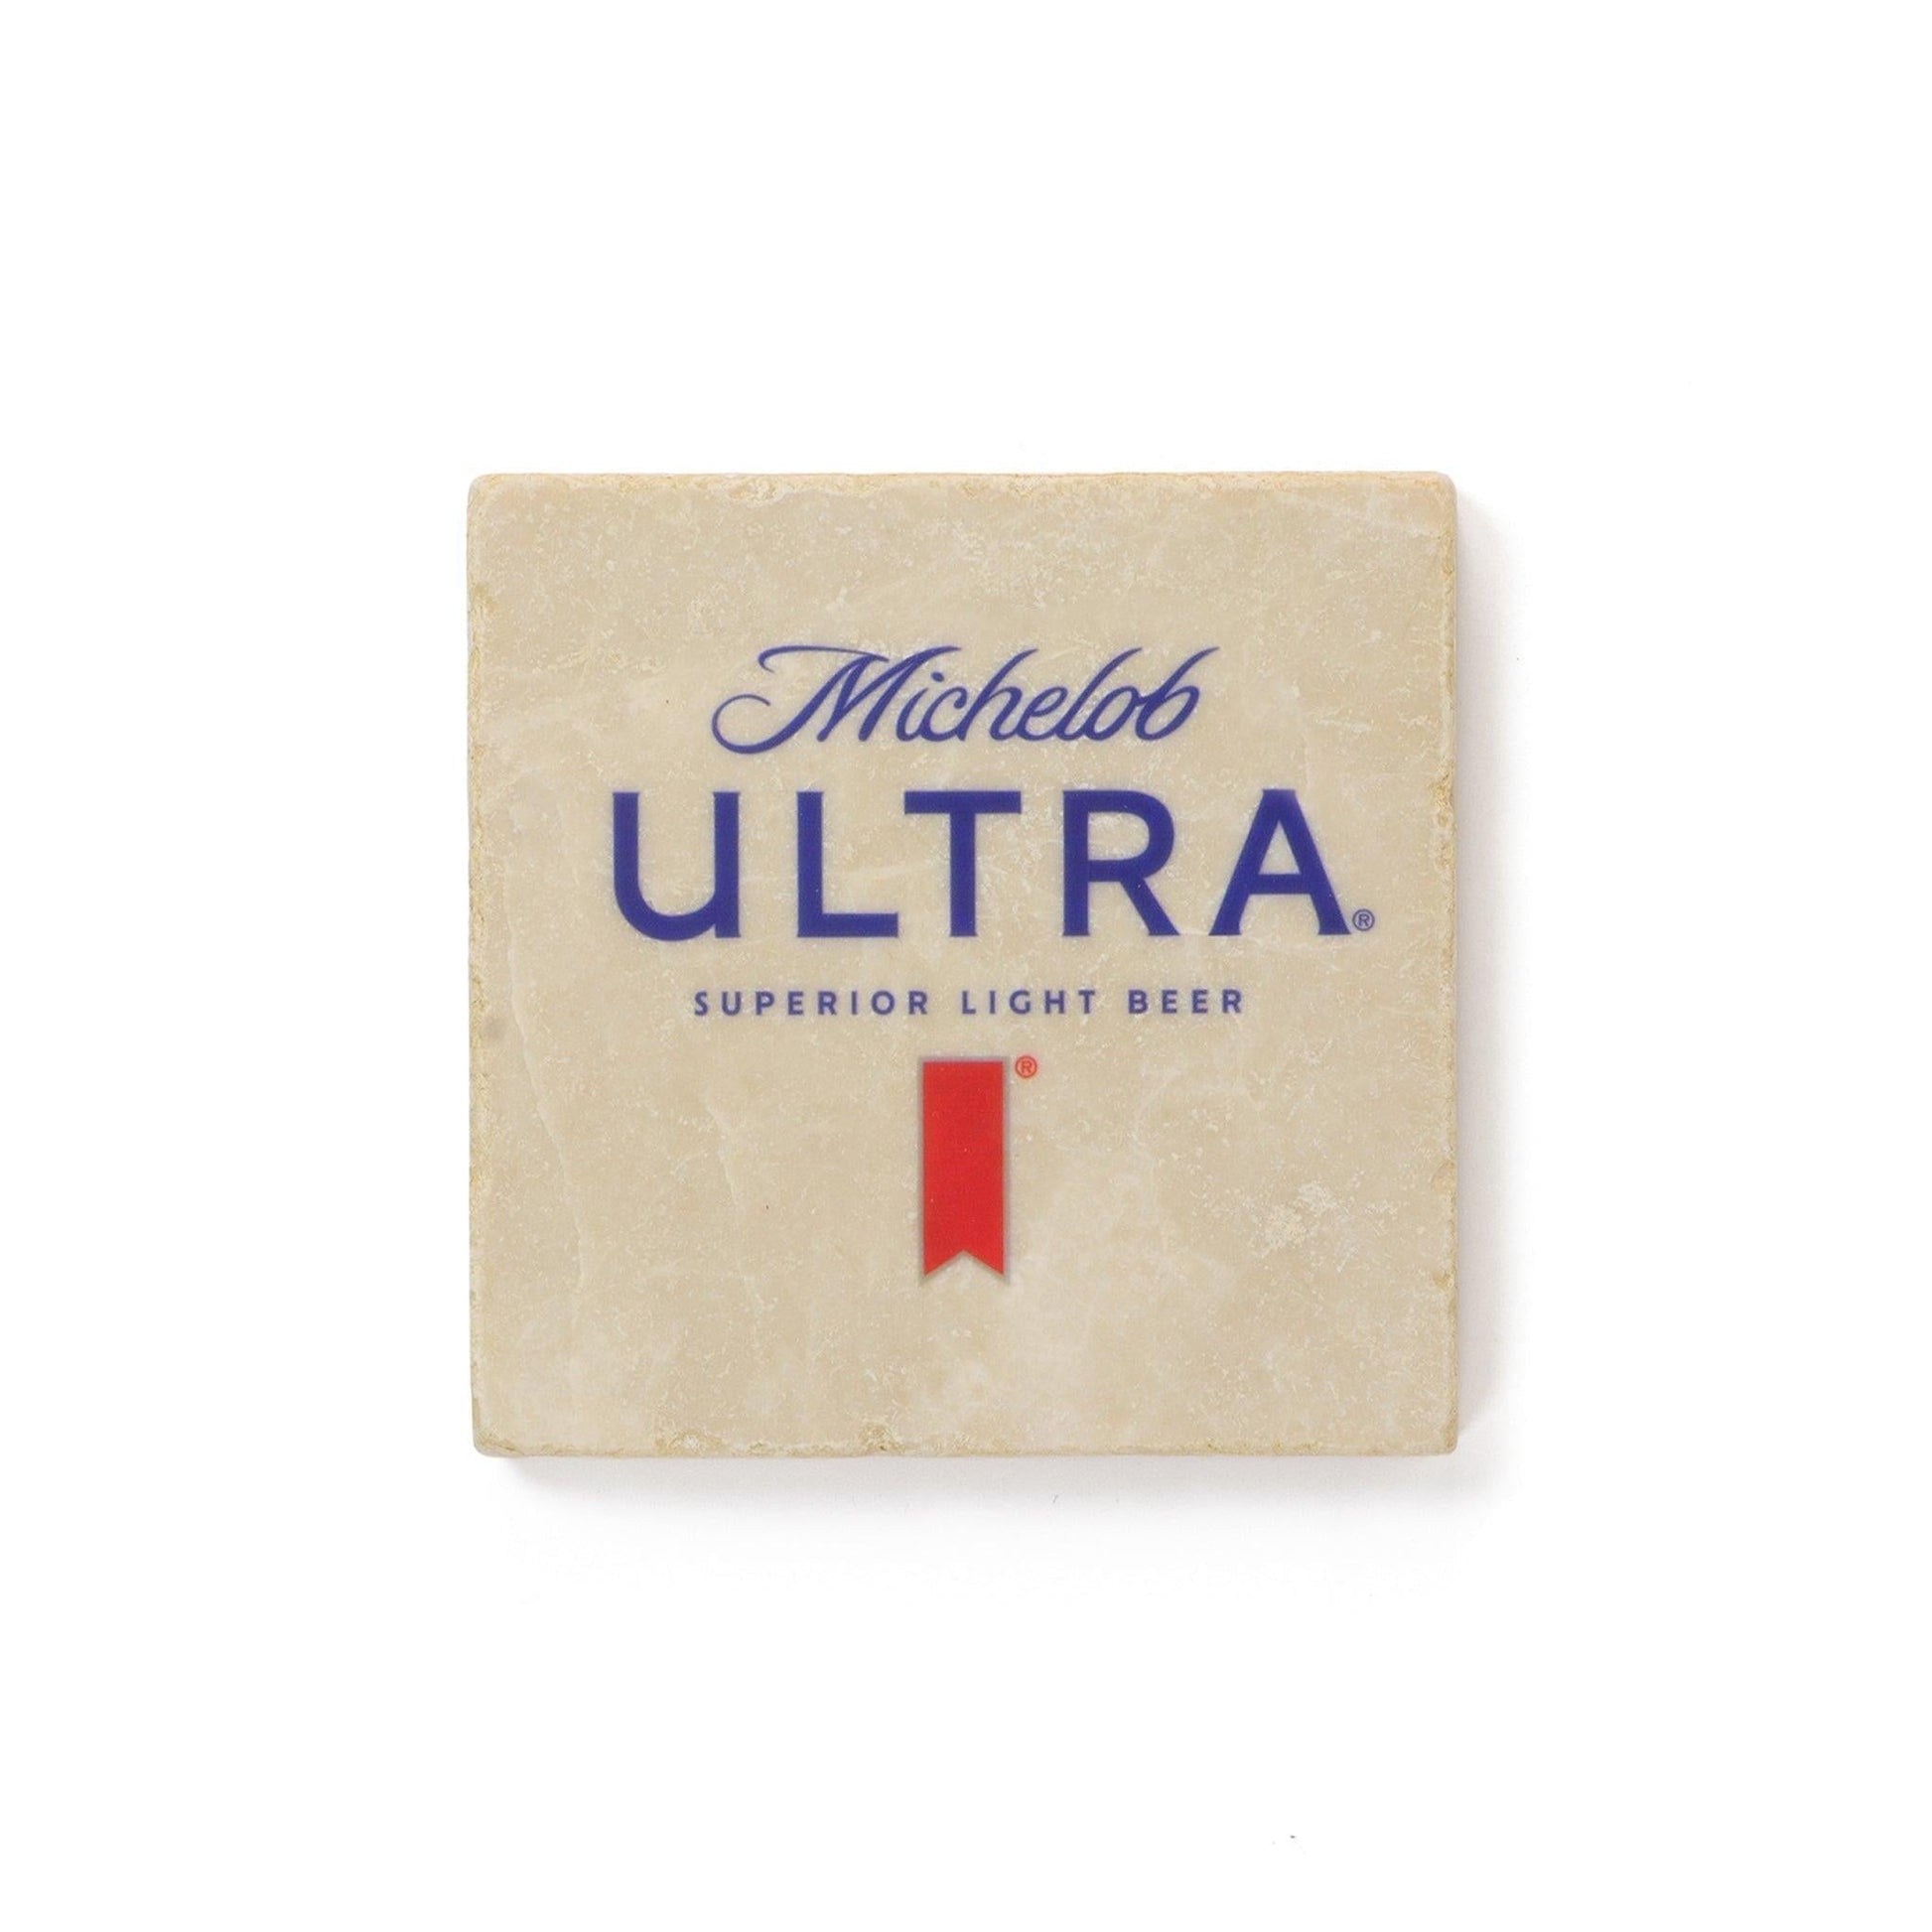 Cream colored square stone coaster with michelob ULTRA Superior Light Beer logo with red ribbon below.